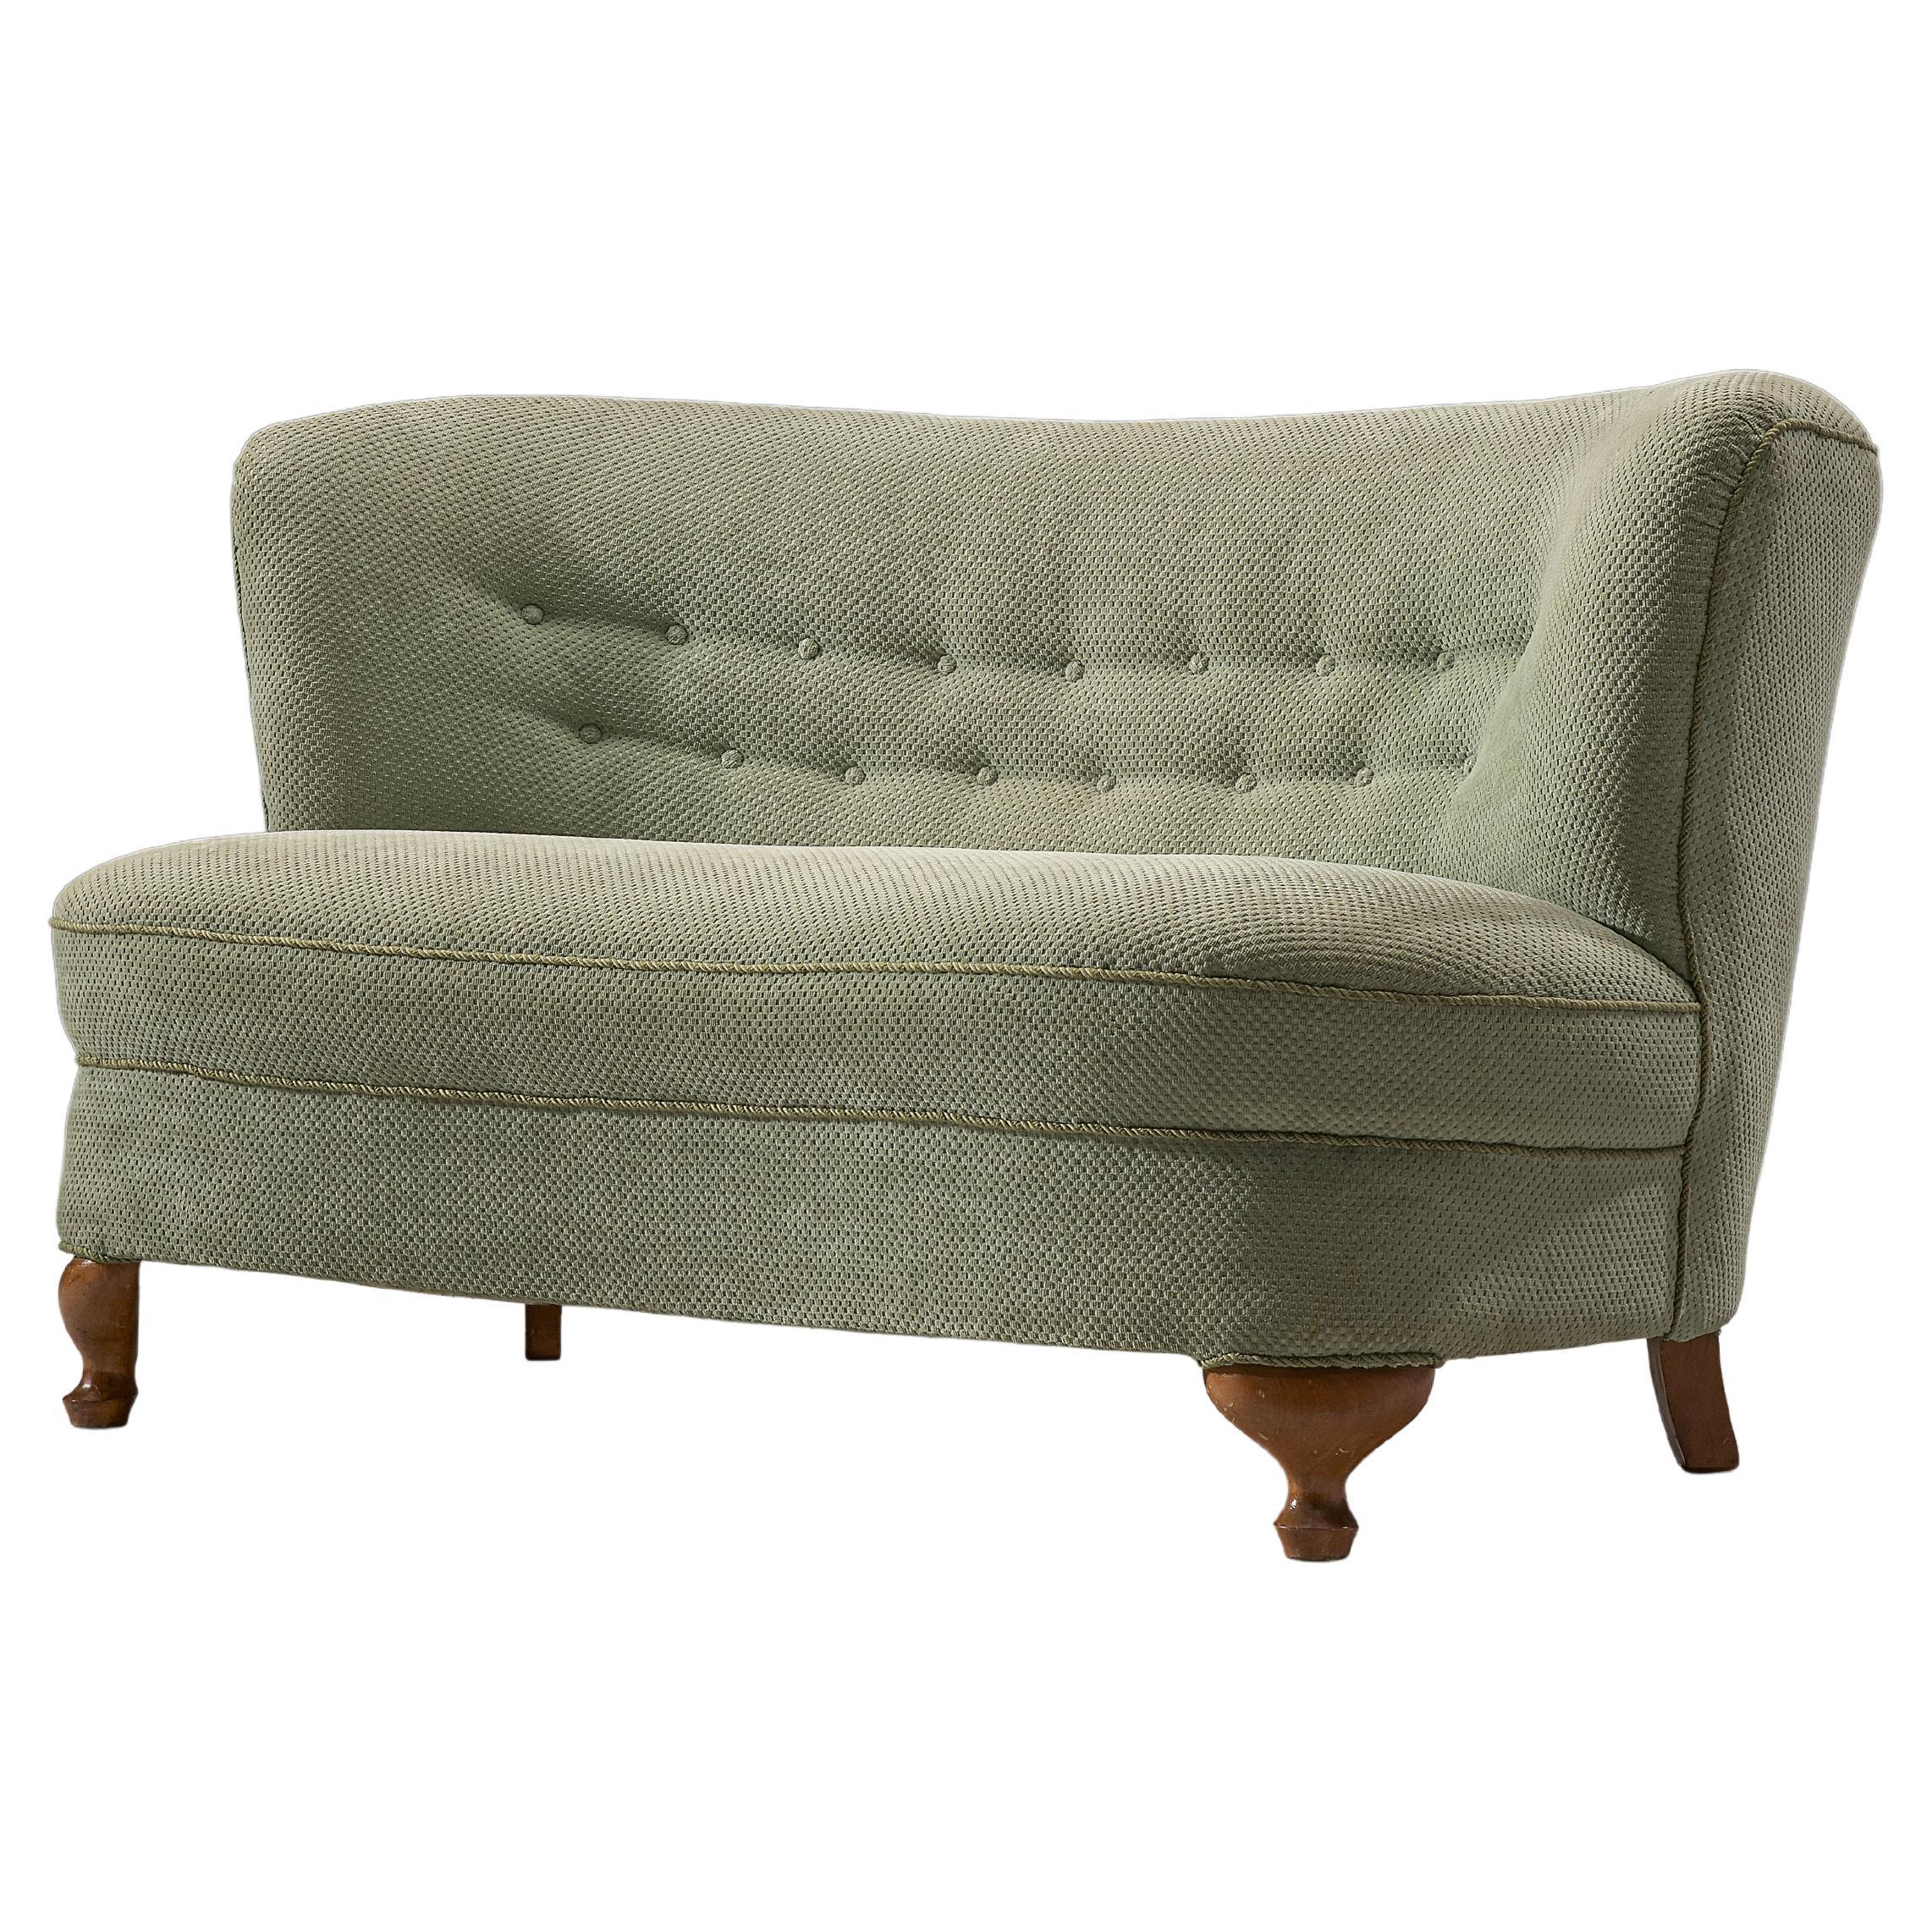 French Settee in Olive Green Upholstery 